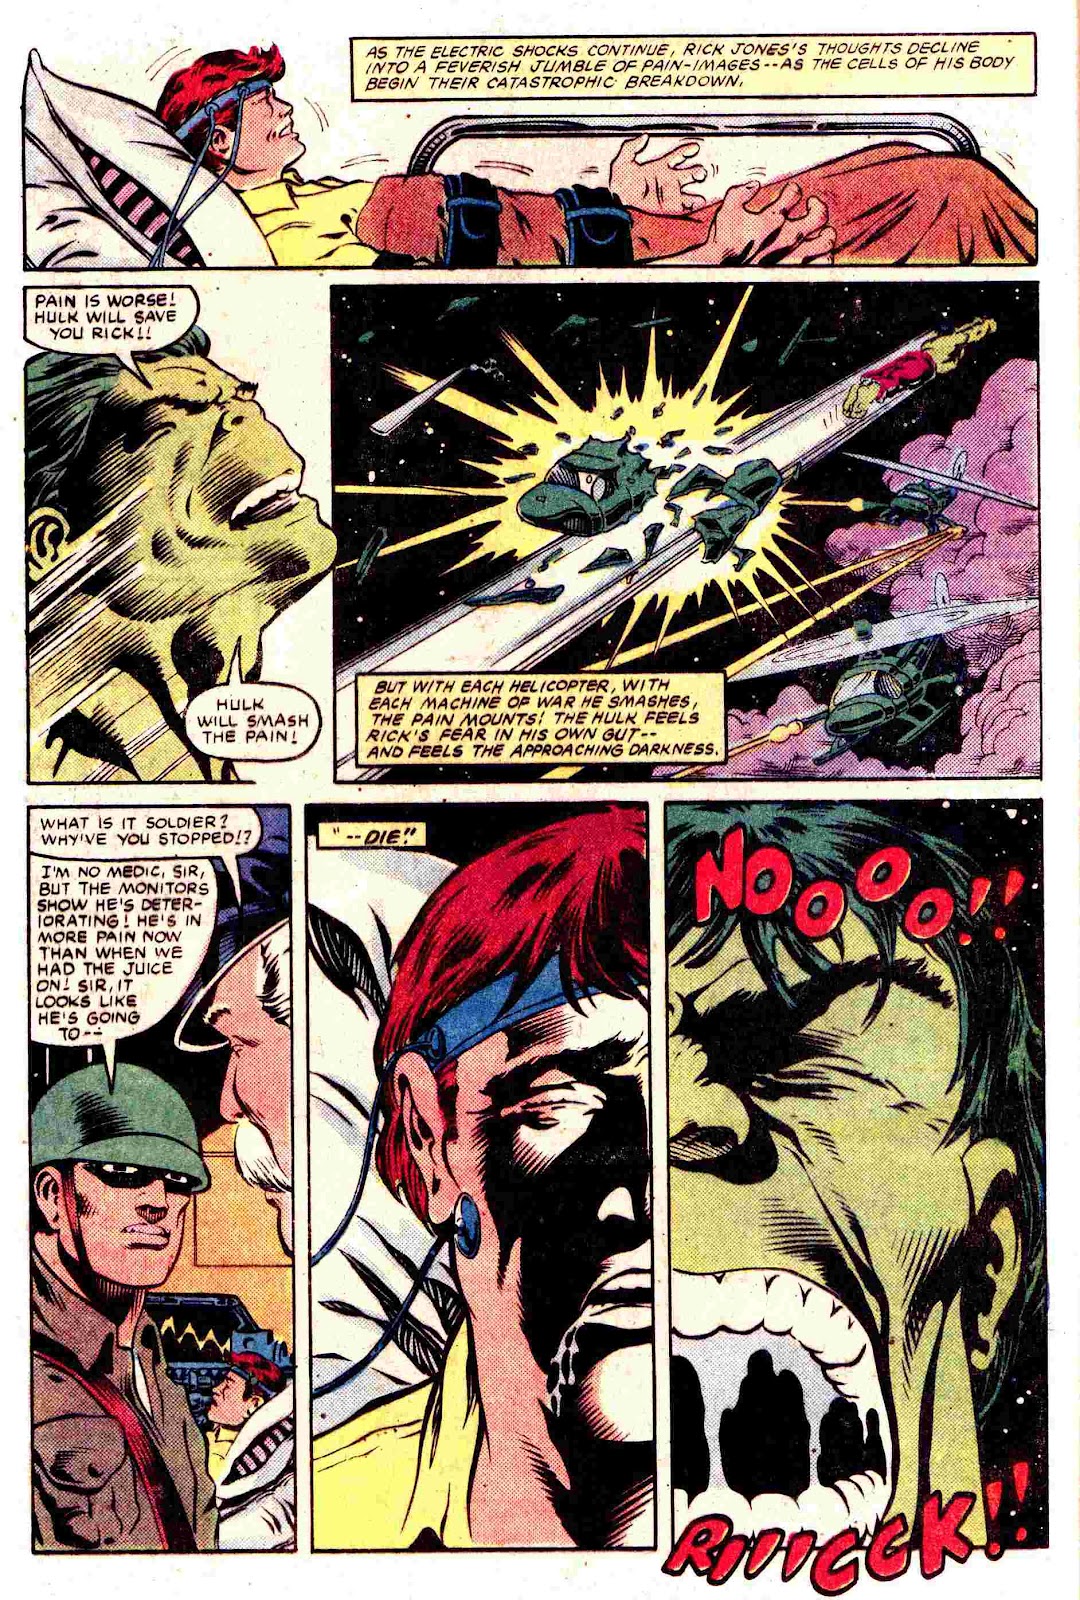 What If? (1977) issue 45 - The Hulk went Berserk - Page 19